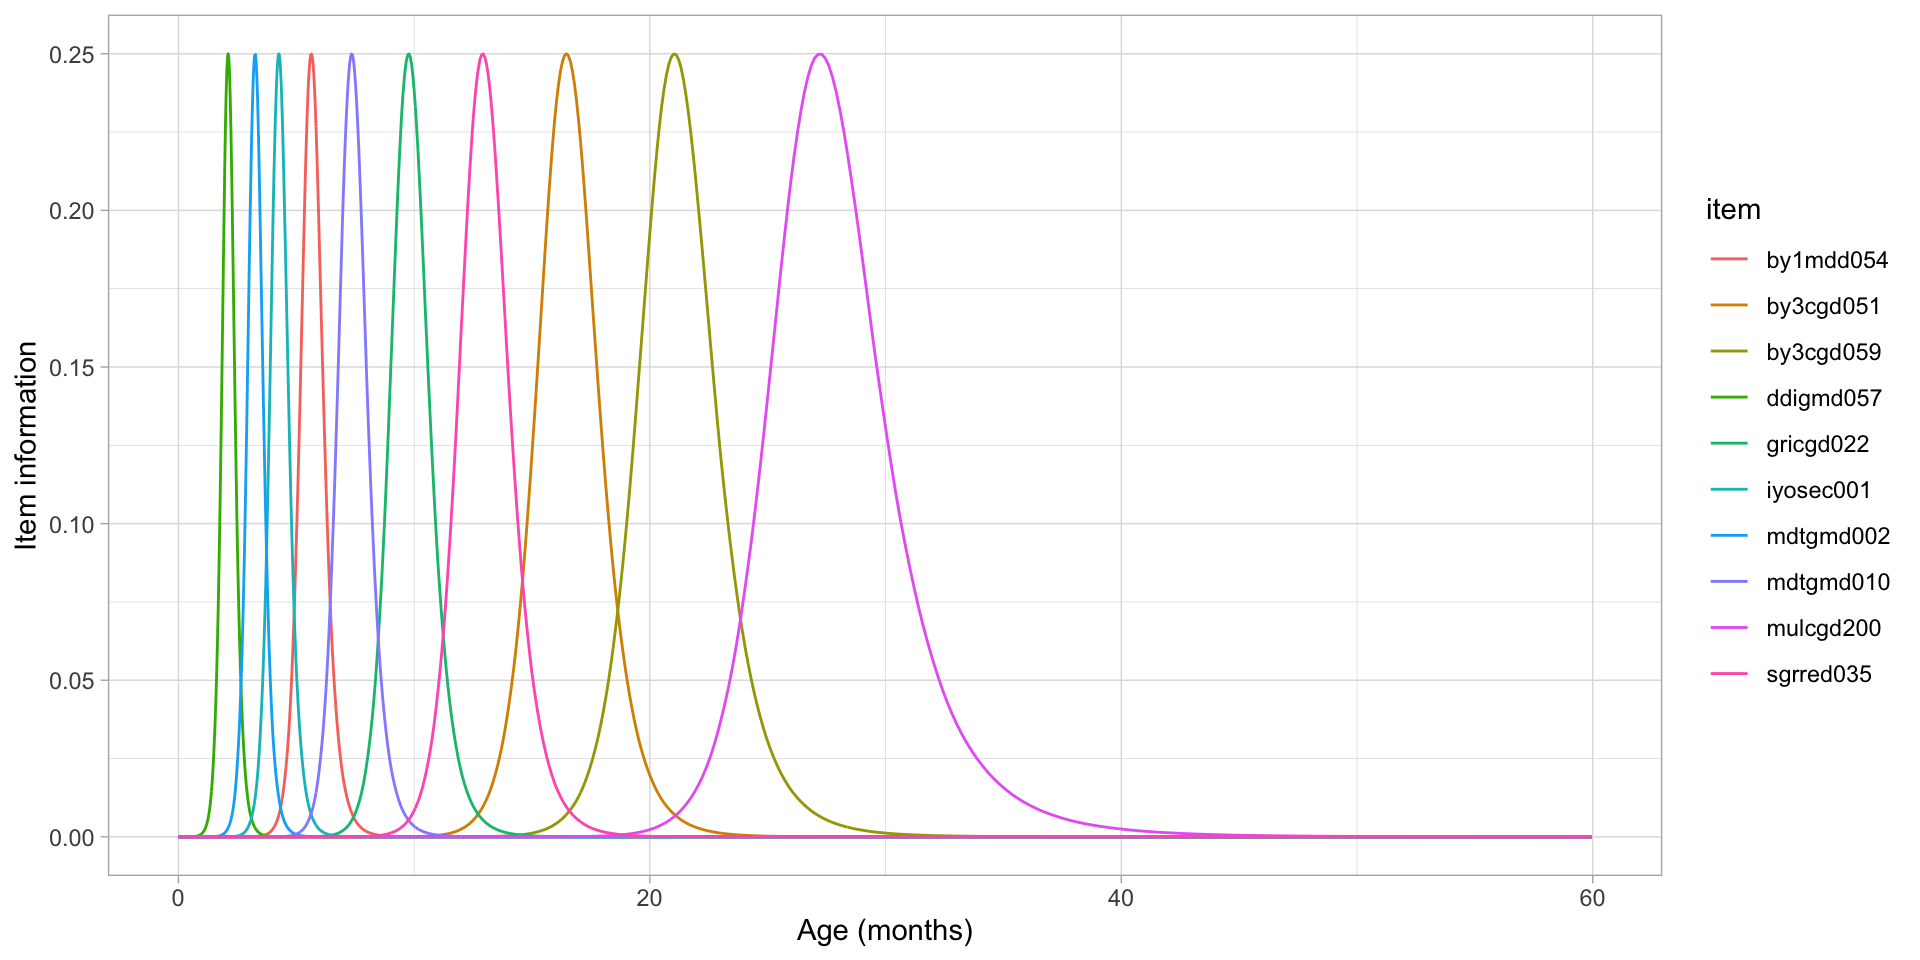 Item information by age for a set of 10 items nicely distributed over the \(D\)-score scale.